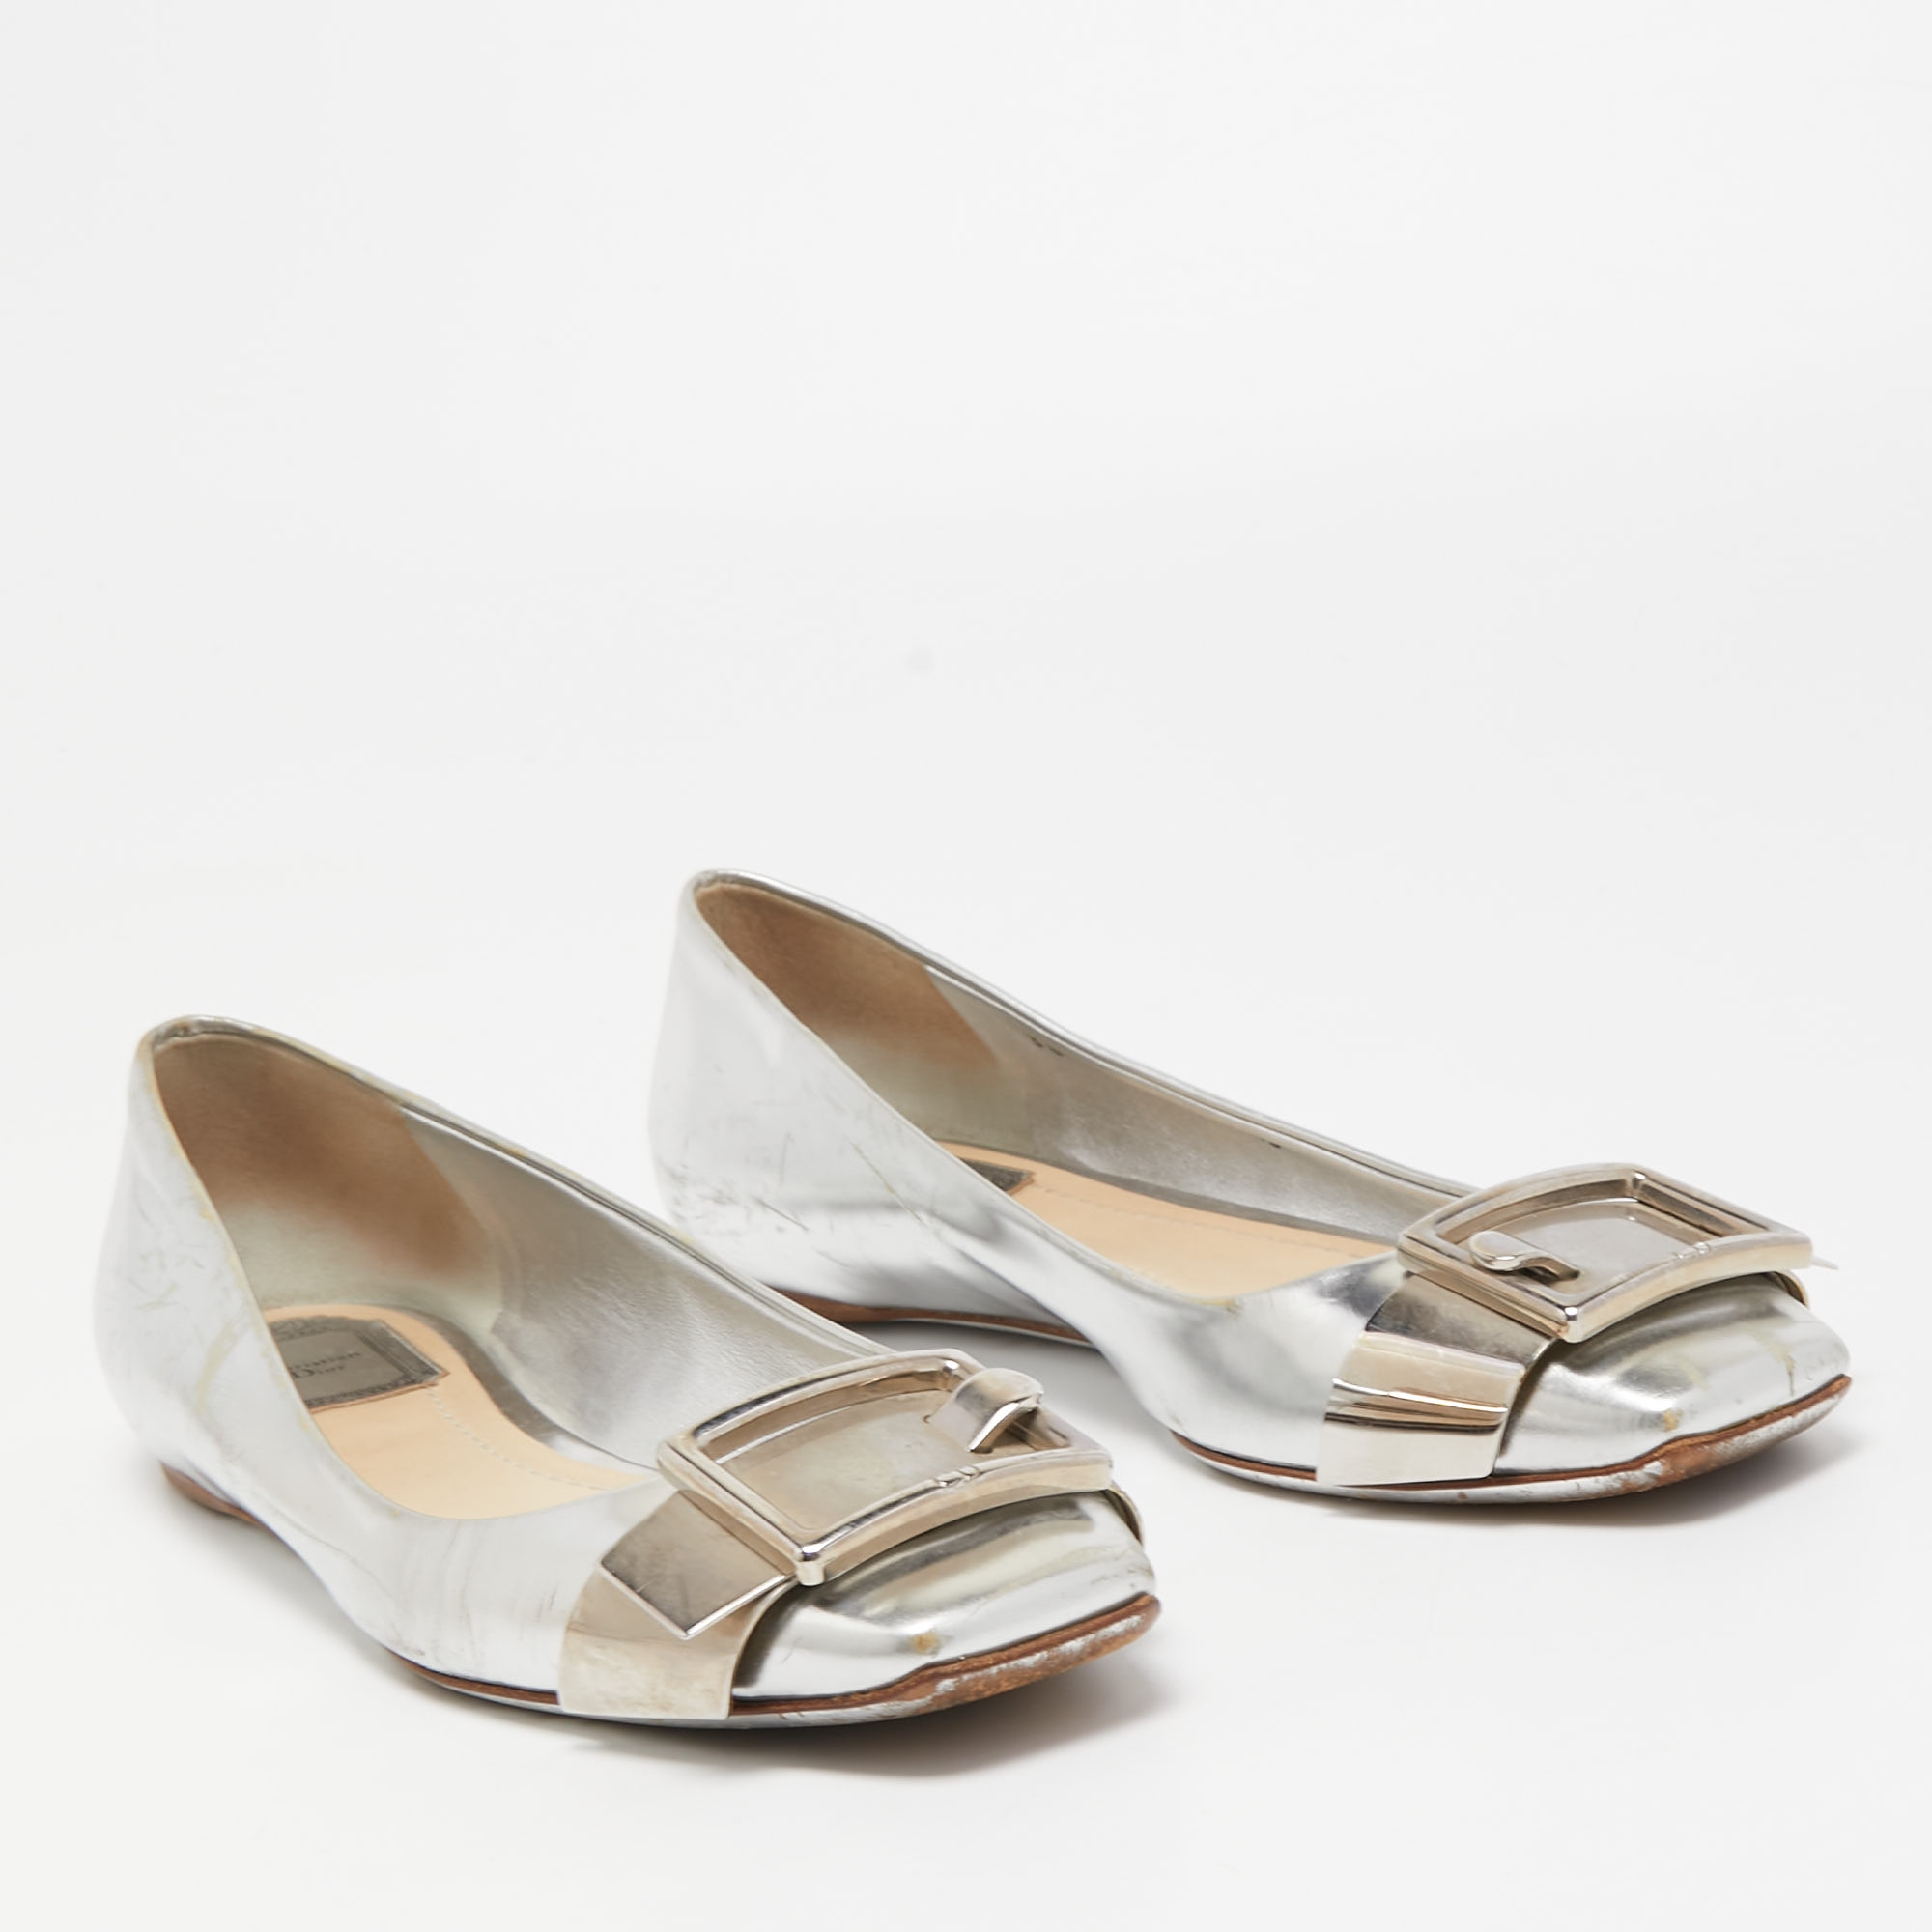 Dior Silver Leather Bow Ballet Flats Size 38